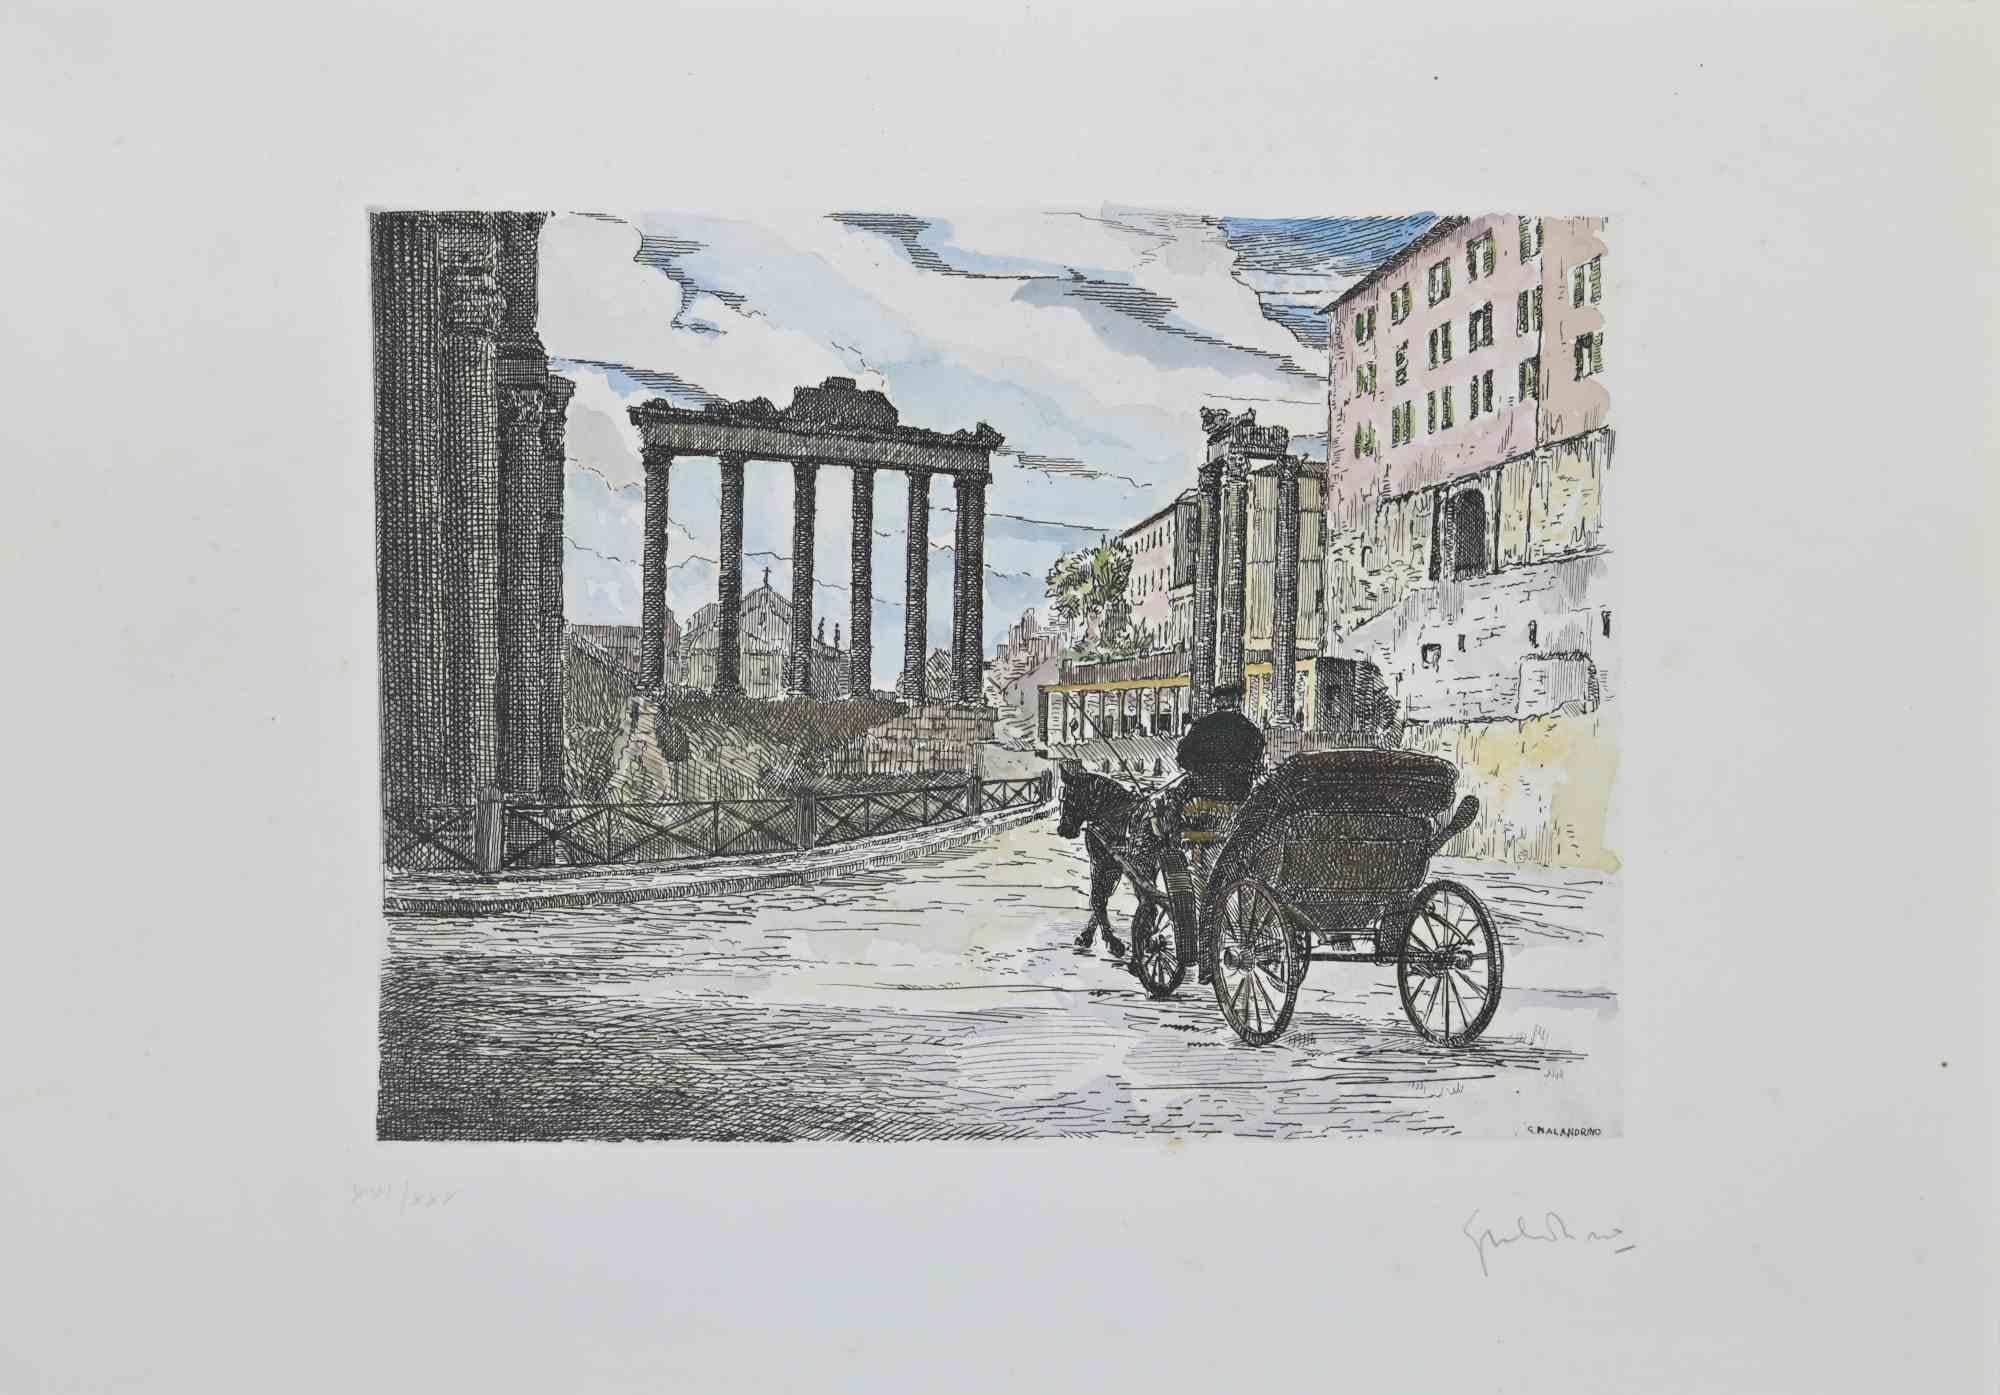 Roman Forum is an artwork realized by Giuseppe Malandrino.

Print in etching technique and hand watercolored.

Hand-signed by the artist in pencil on the lower right corner.

Numbered edition of 30 copies.

Good condition with slight foxing.

This